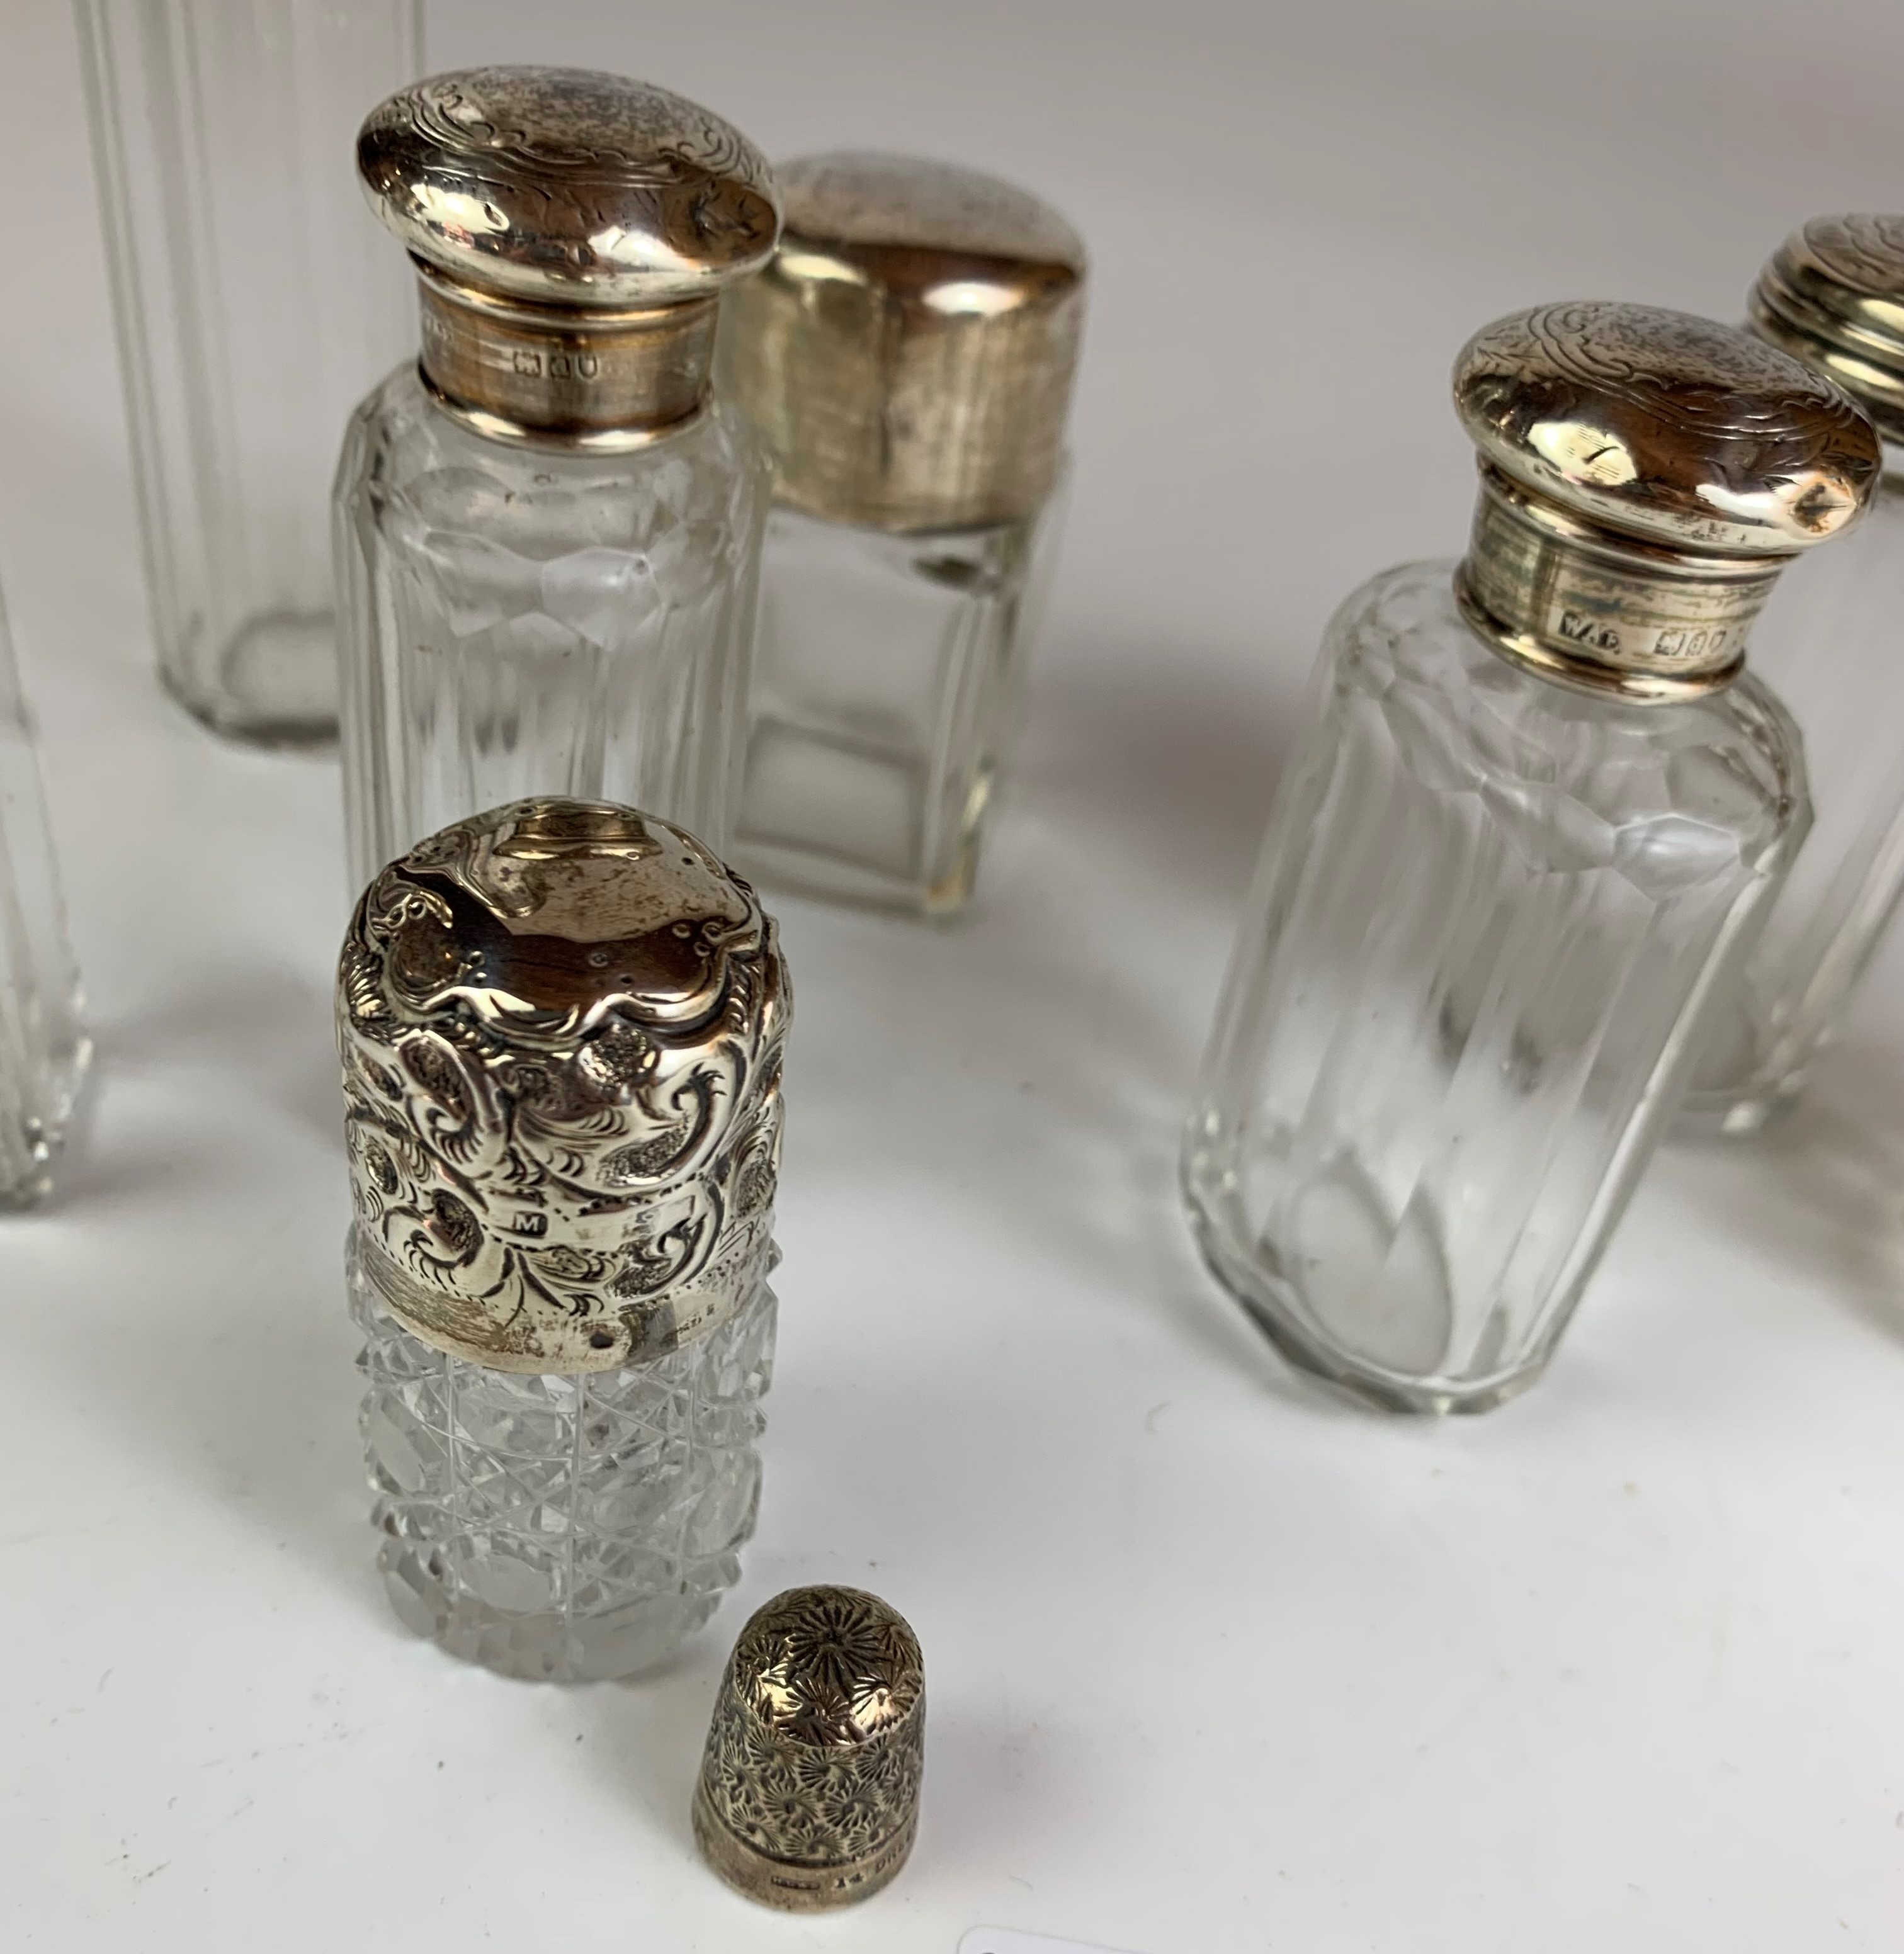 8 assorted silver topped glass bottles and silver thimble, tallest bottle 7” high - Image 6 of 6